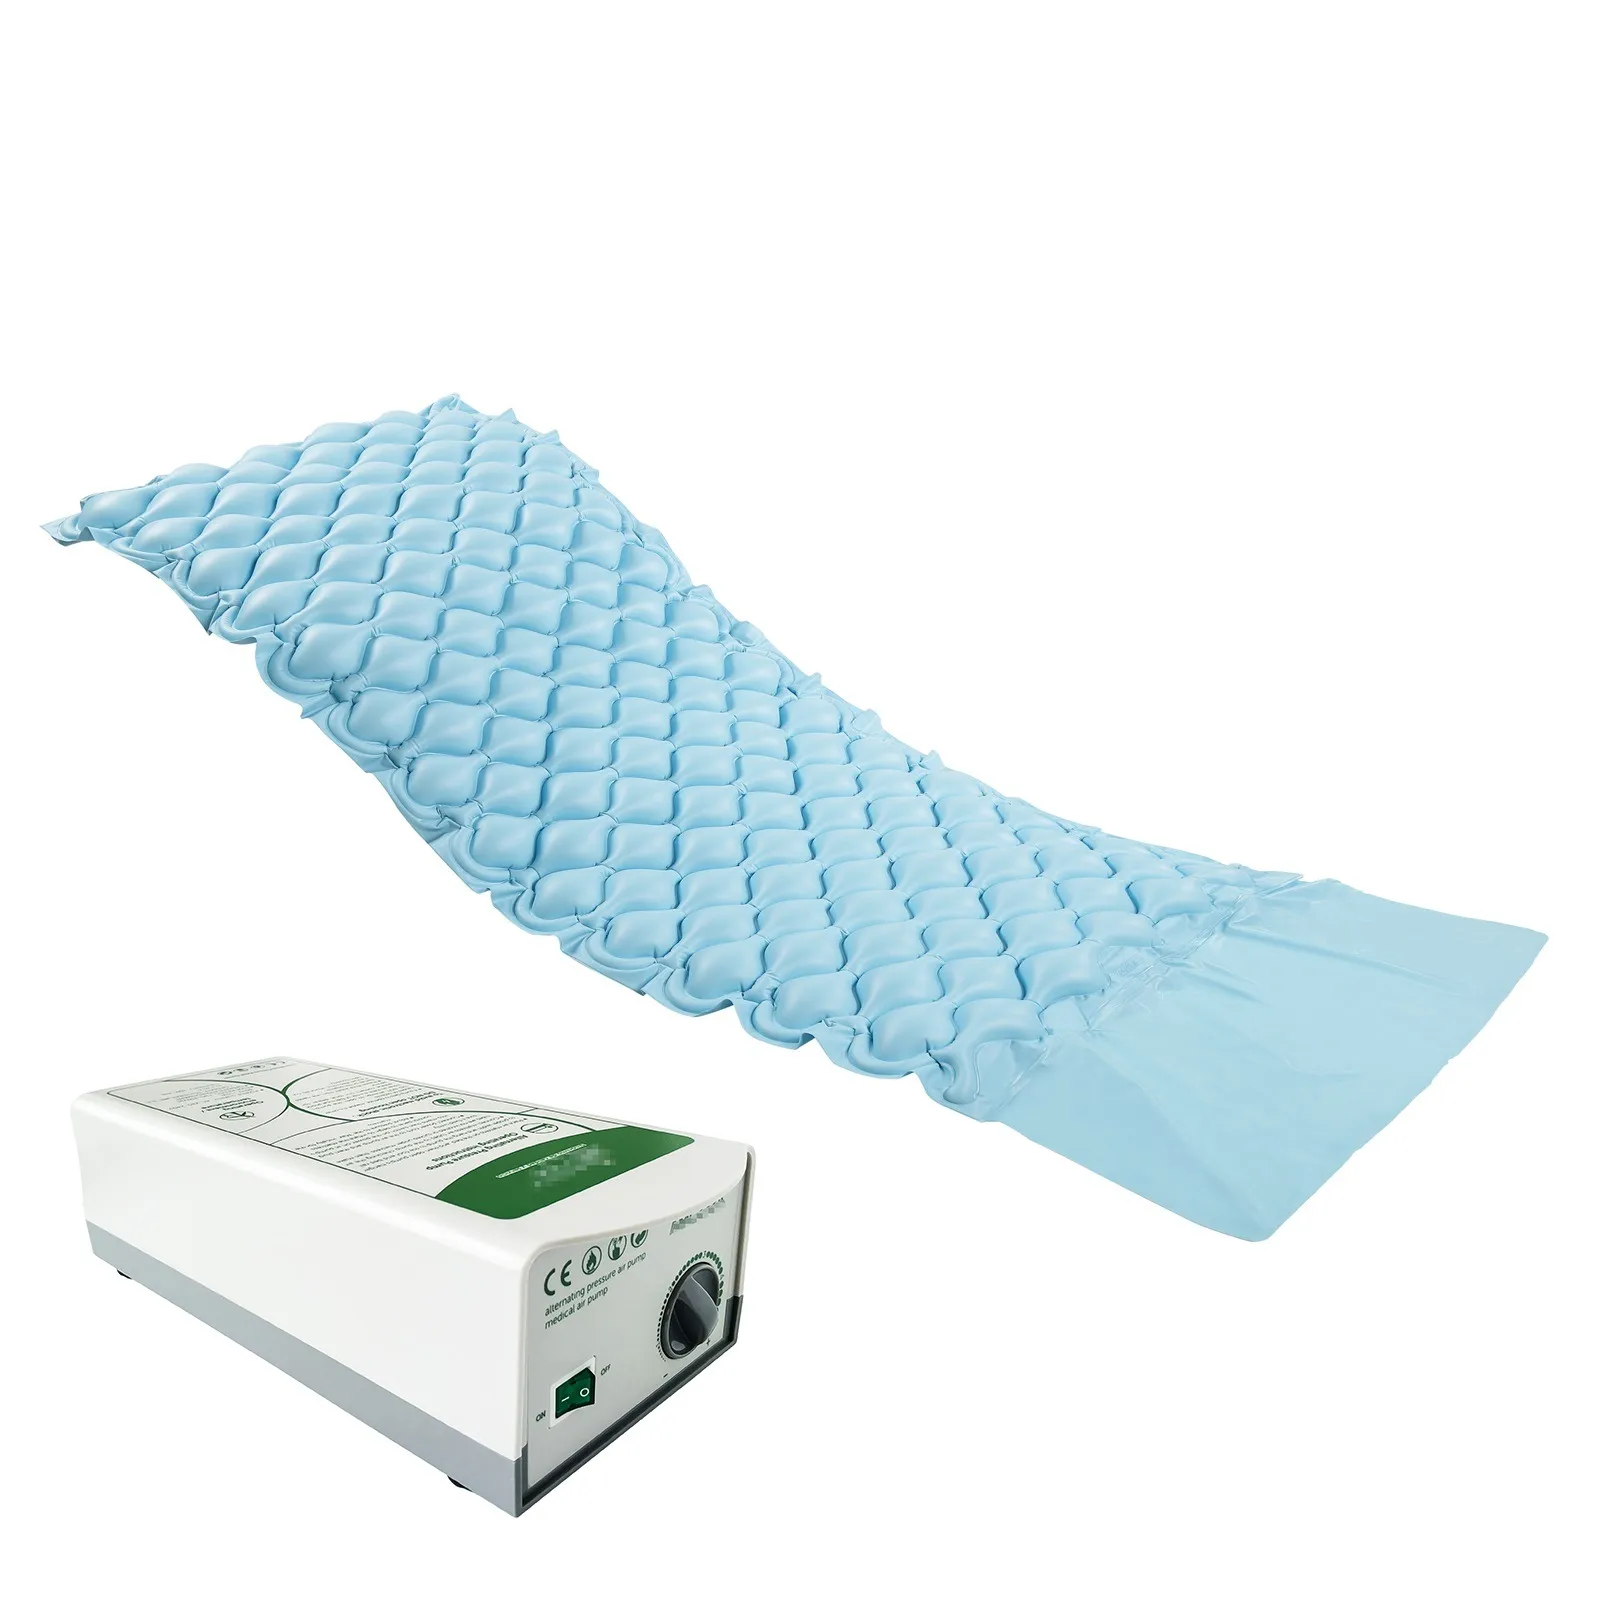 Hudson - From: 5742-80CA To: 5742-84CA - Pressure Eez Prevent Mat Therapeutic Mattress